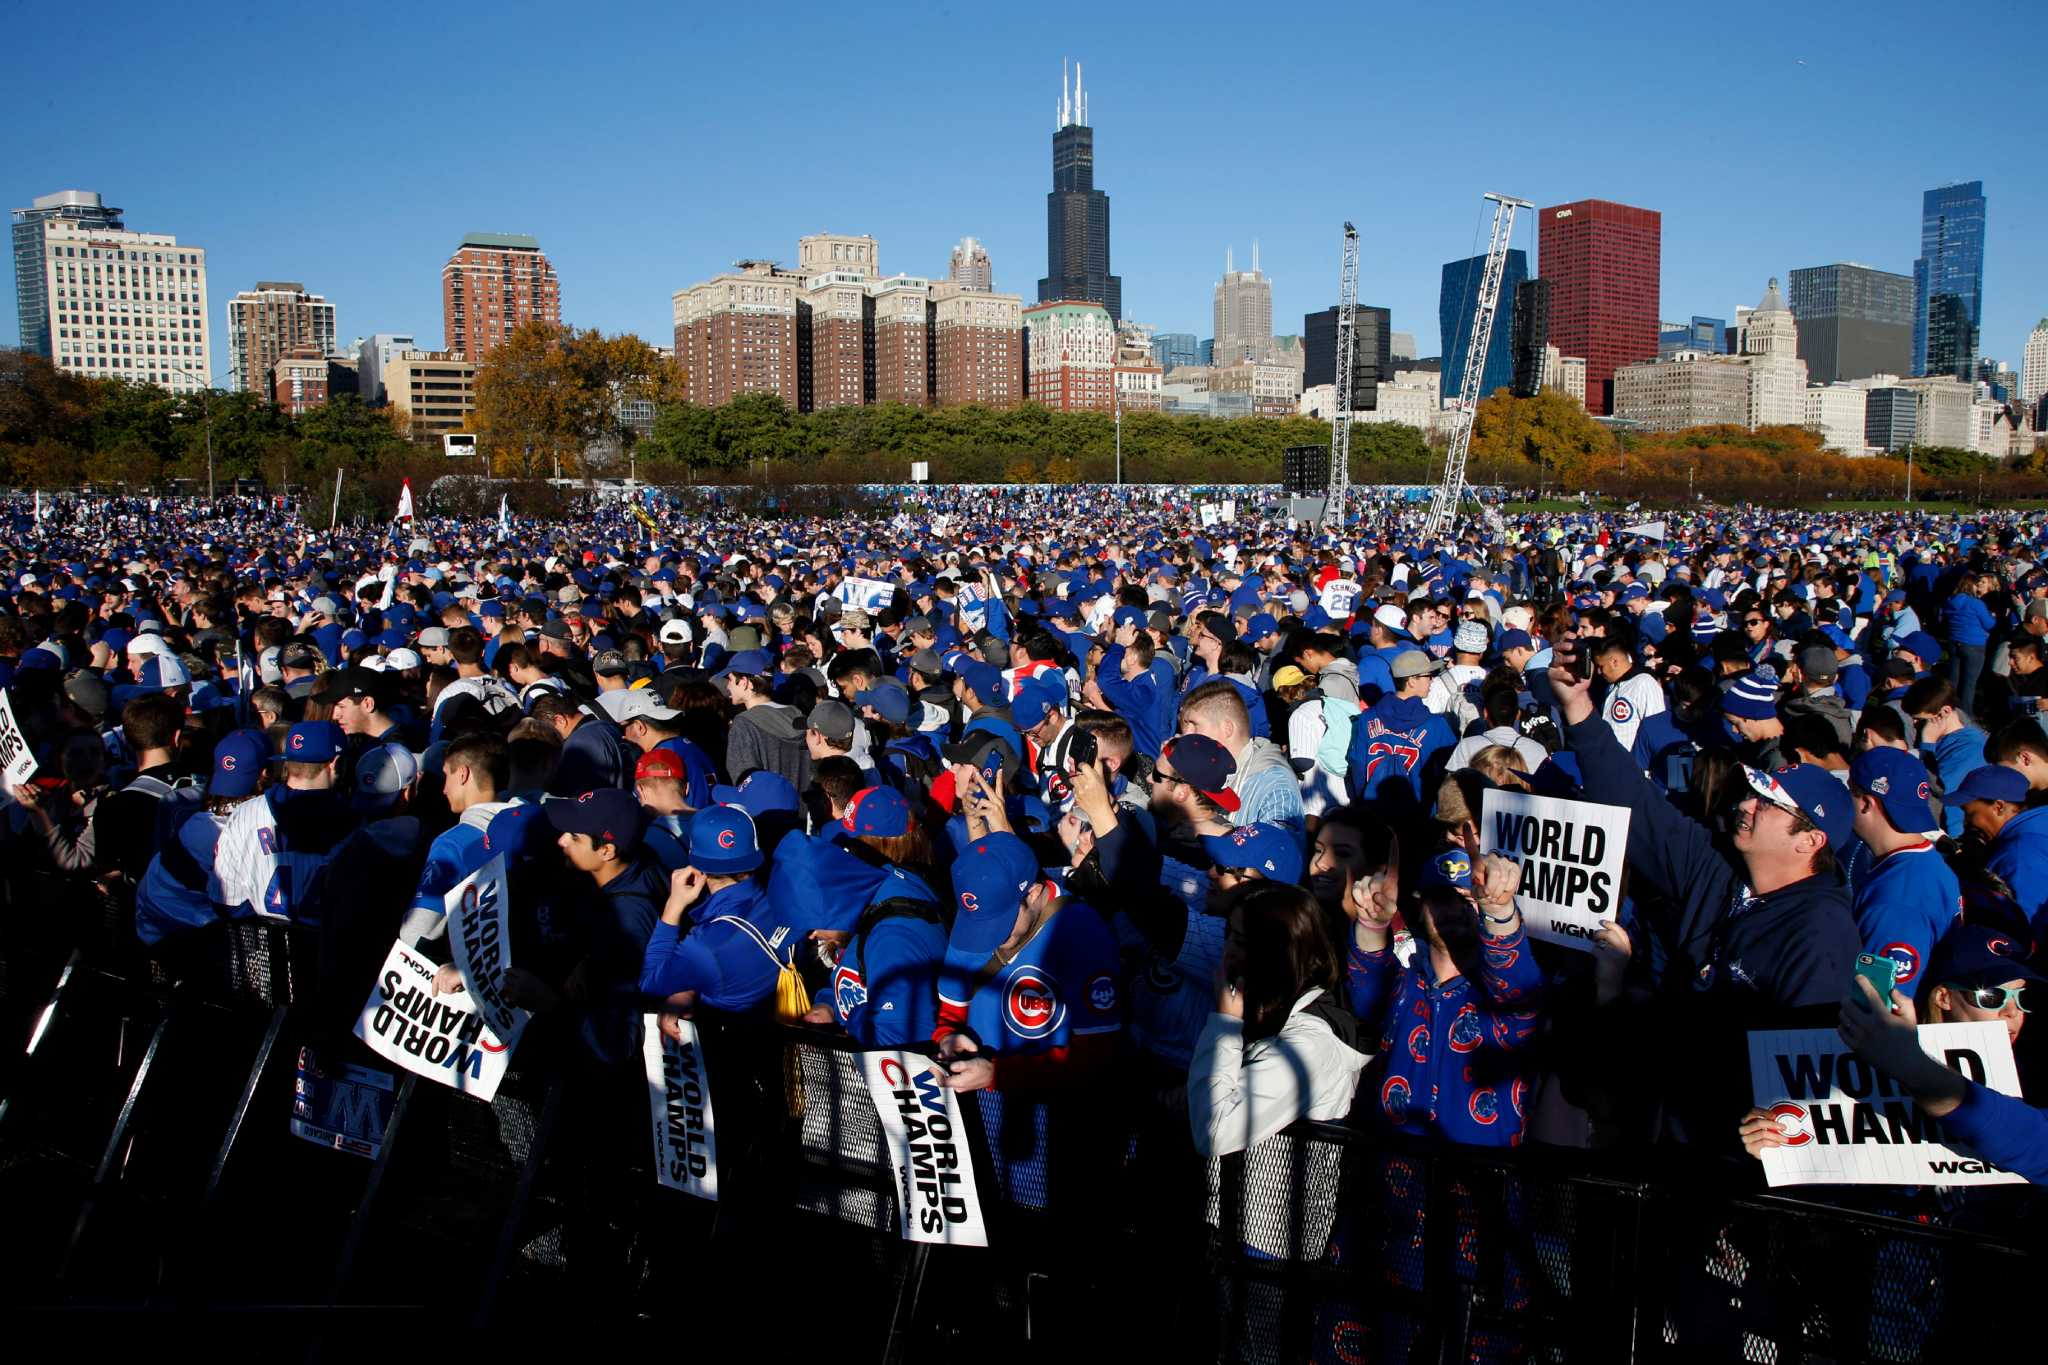 People - Photos  Cubs world series, Chicago cubs baseball, Chicago cubs